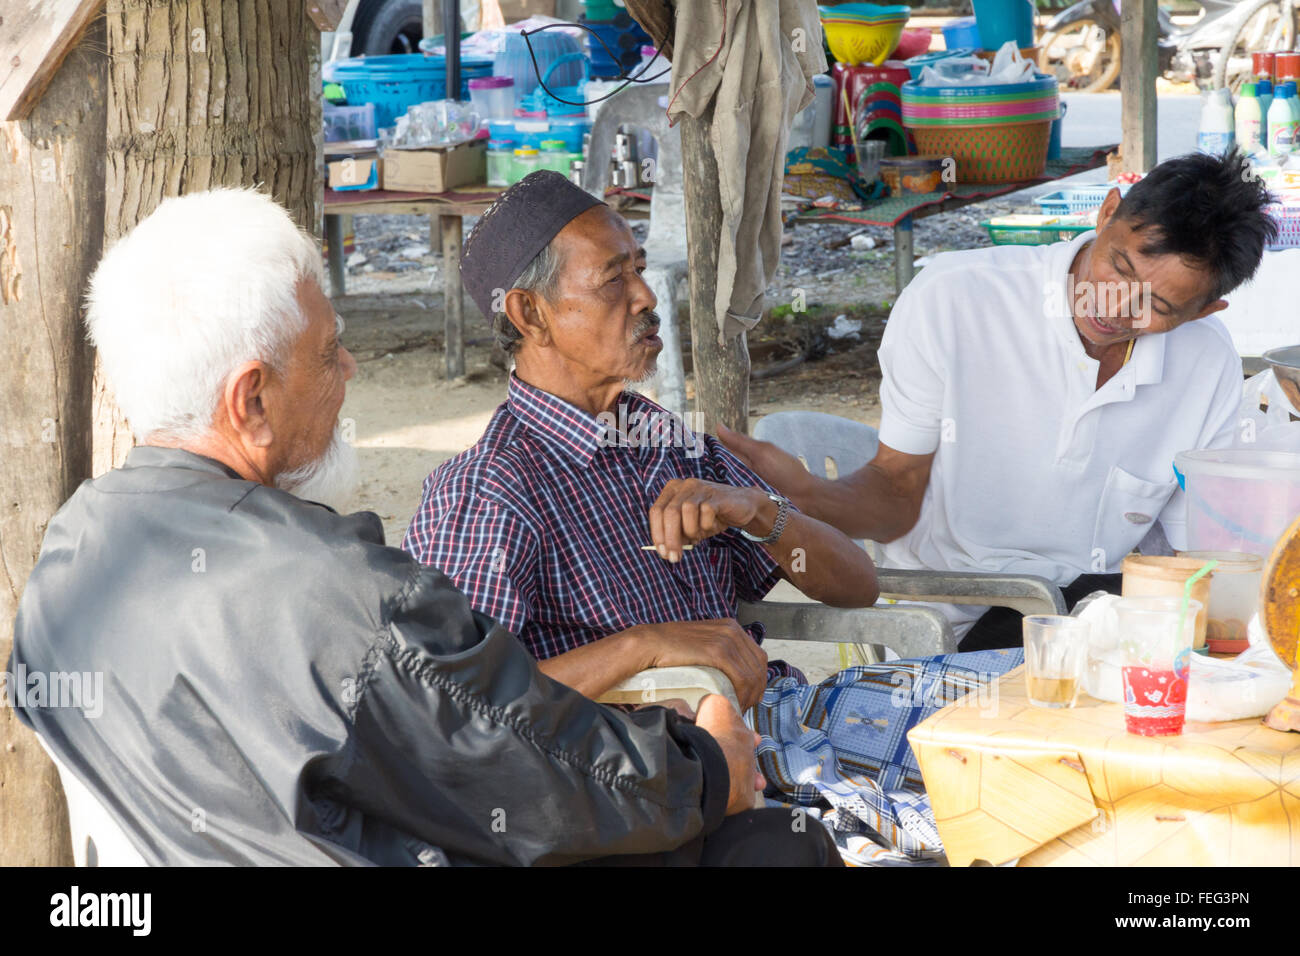 Sichon, Thailand-February 12th 2015: Muslim men talking. Older men often gather together to chat and drink tea or coffee. Stock Photo